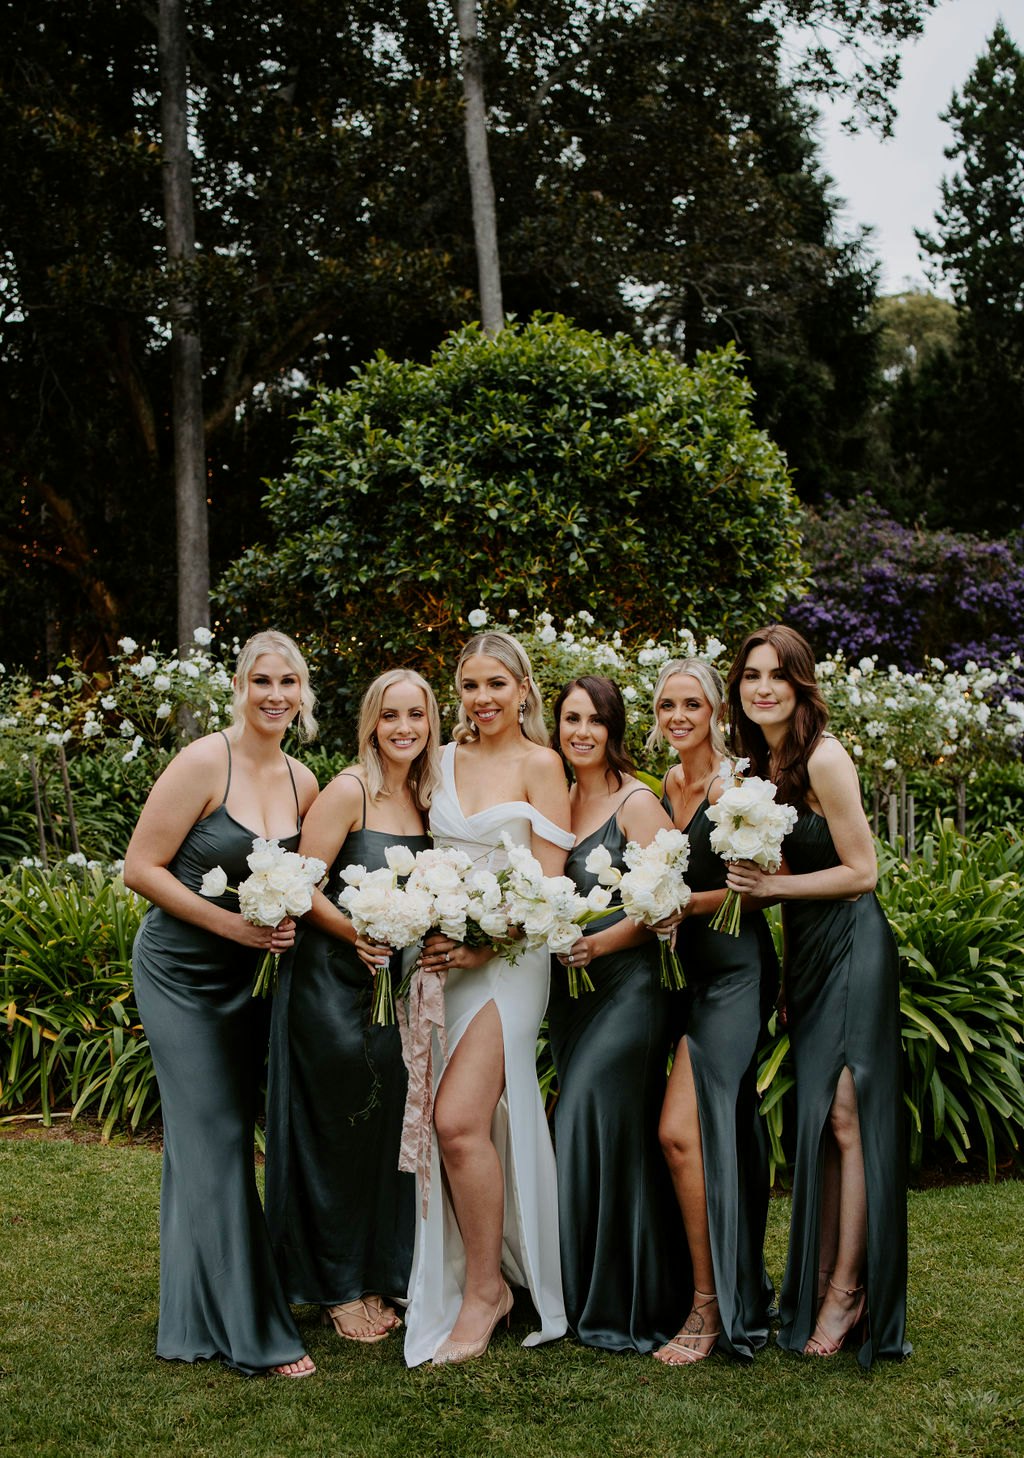 Bride and bridesmaids holding flowers